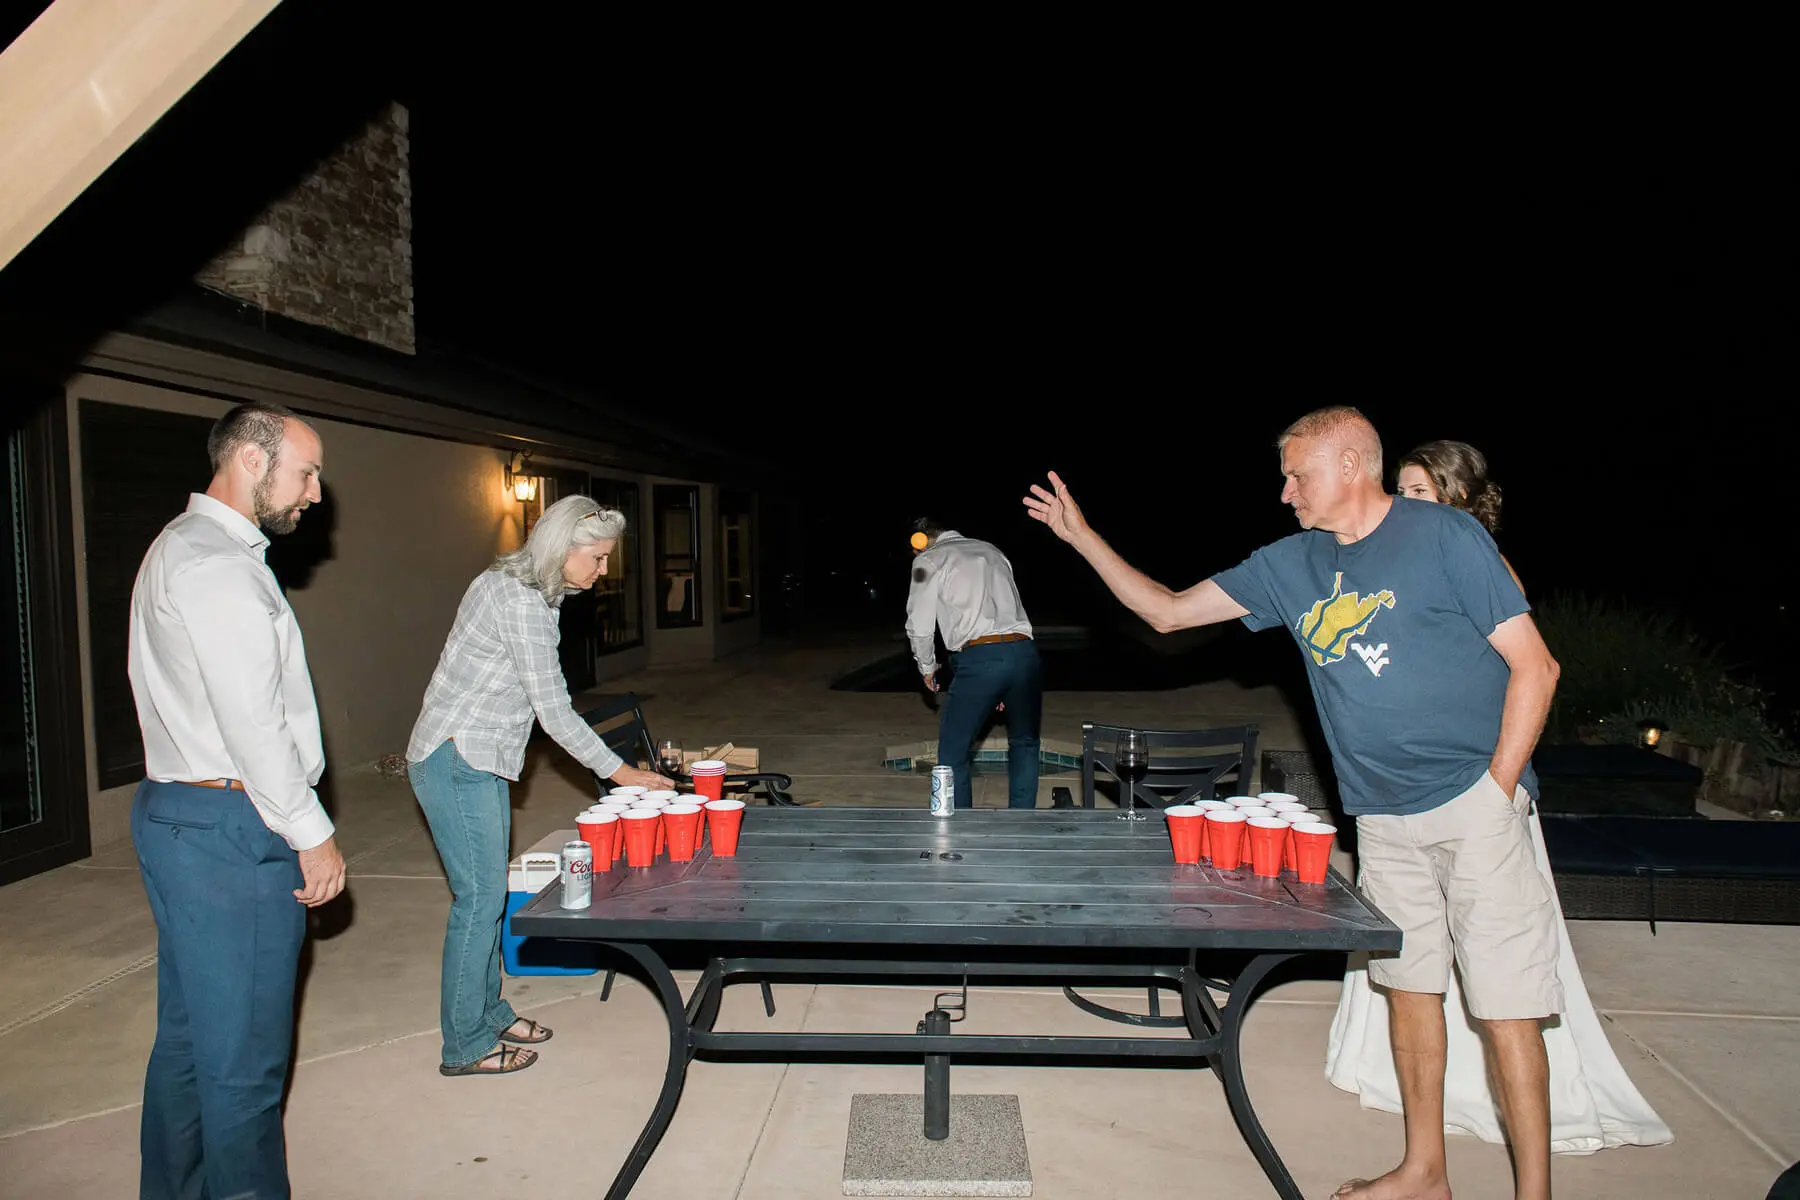 bride and groom and family play beer pong on patio of private residence during intimate wedding reception oakhurst